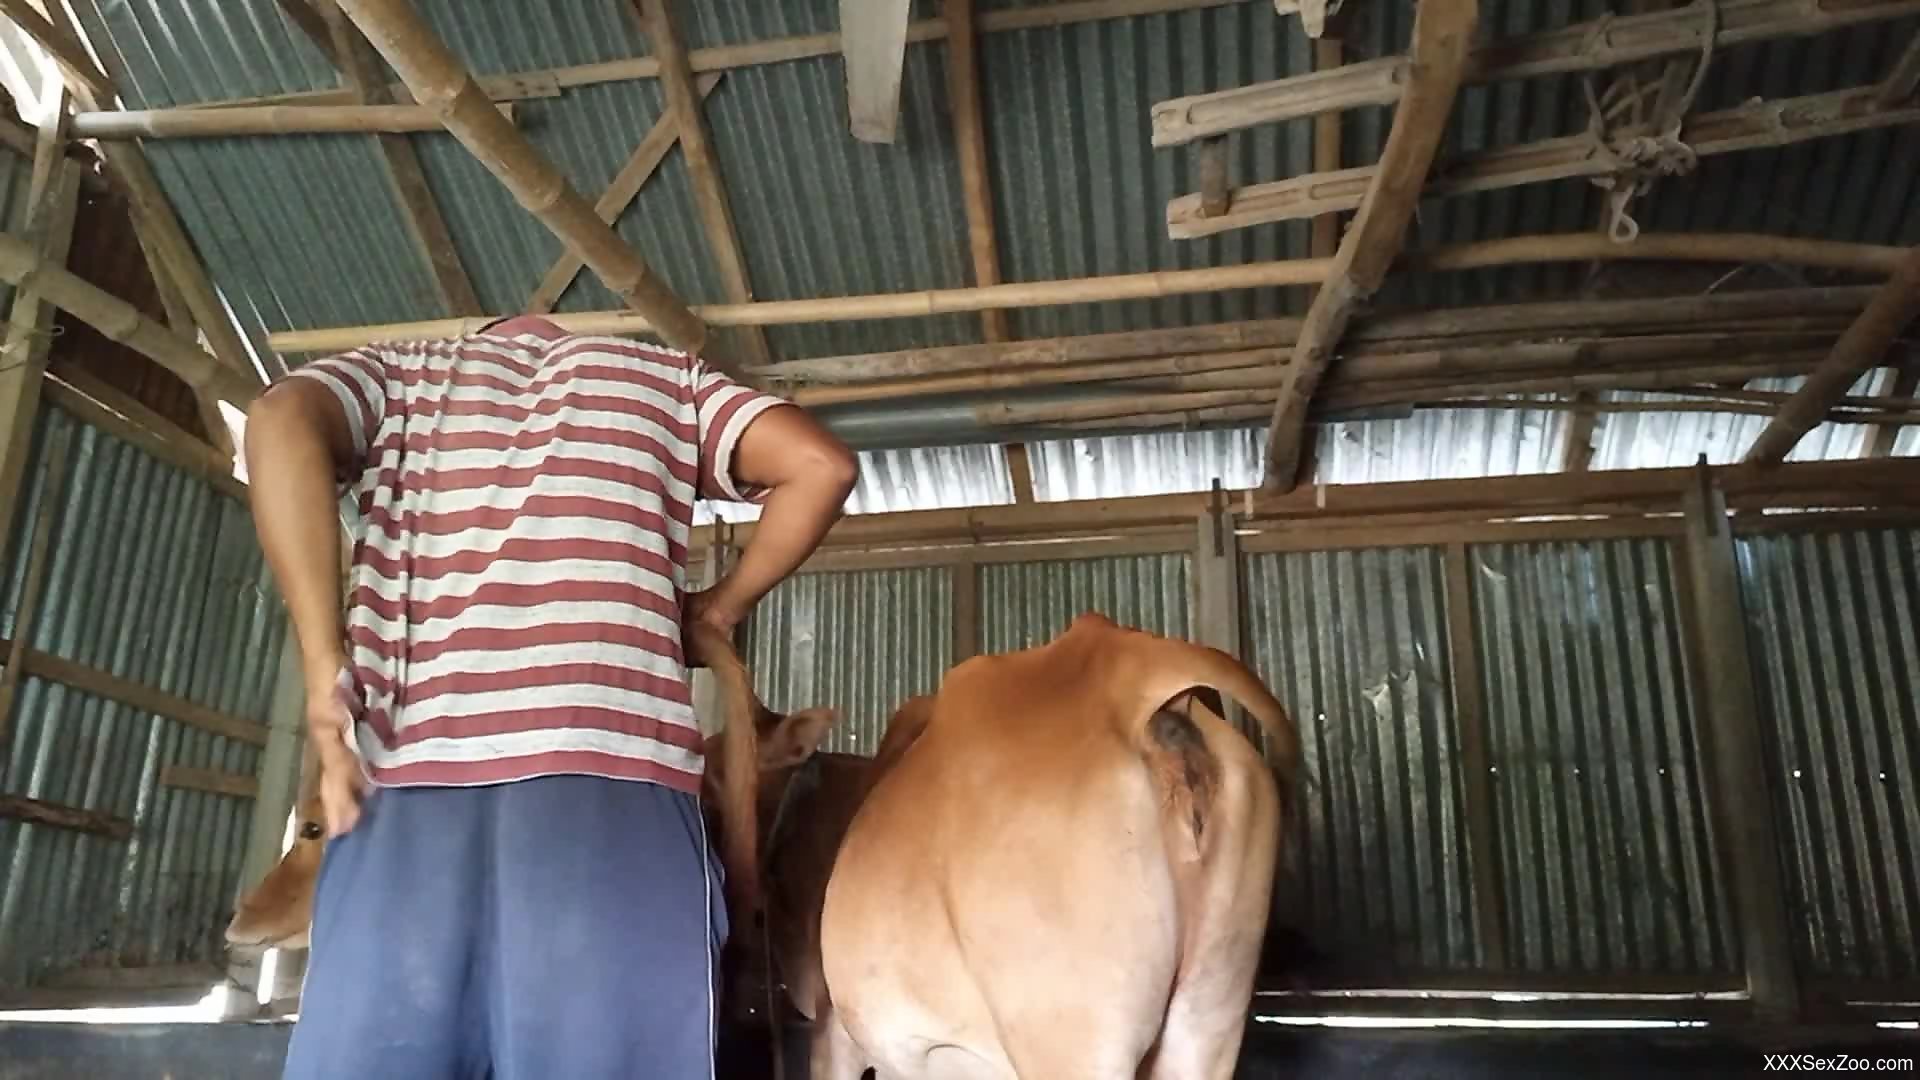 Xxx Cow Man B F - Horny farm guy craves cow's pussy for a few rounds